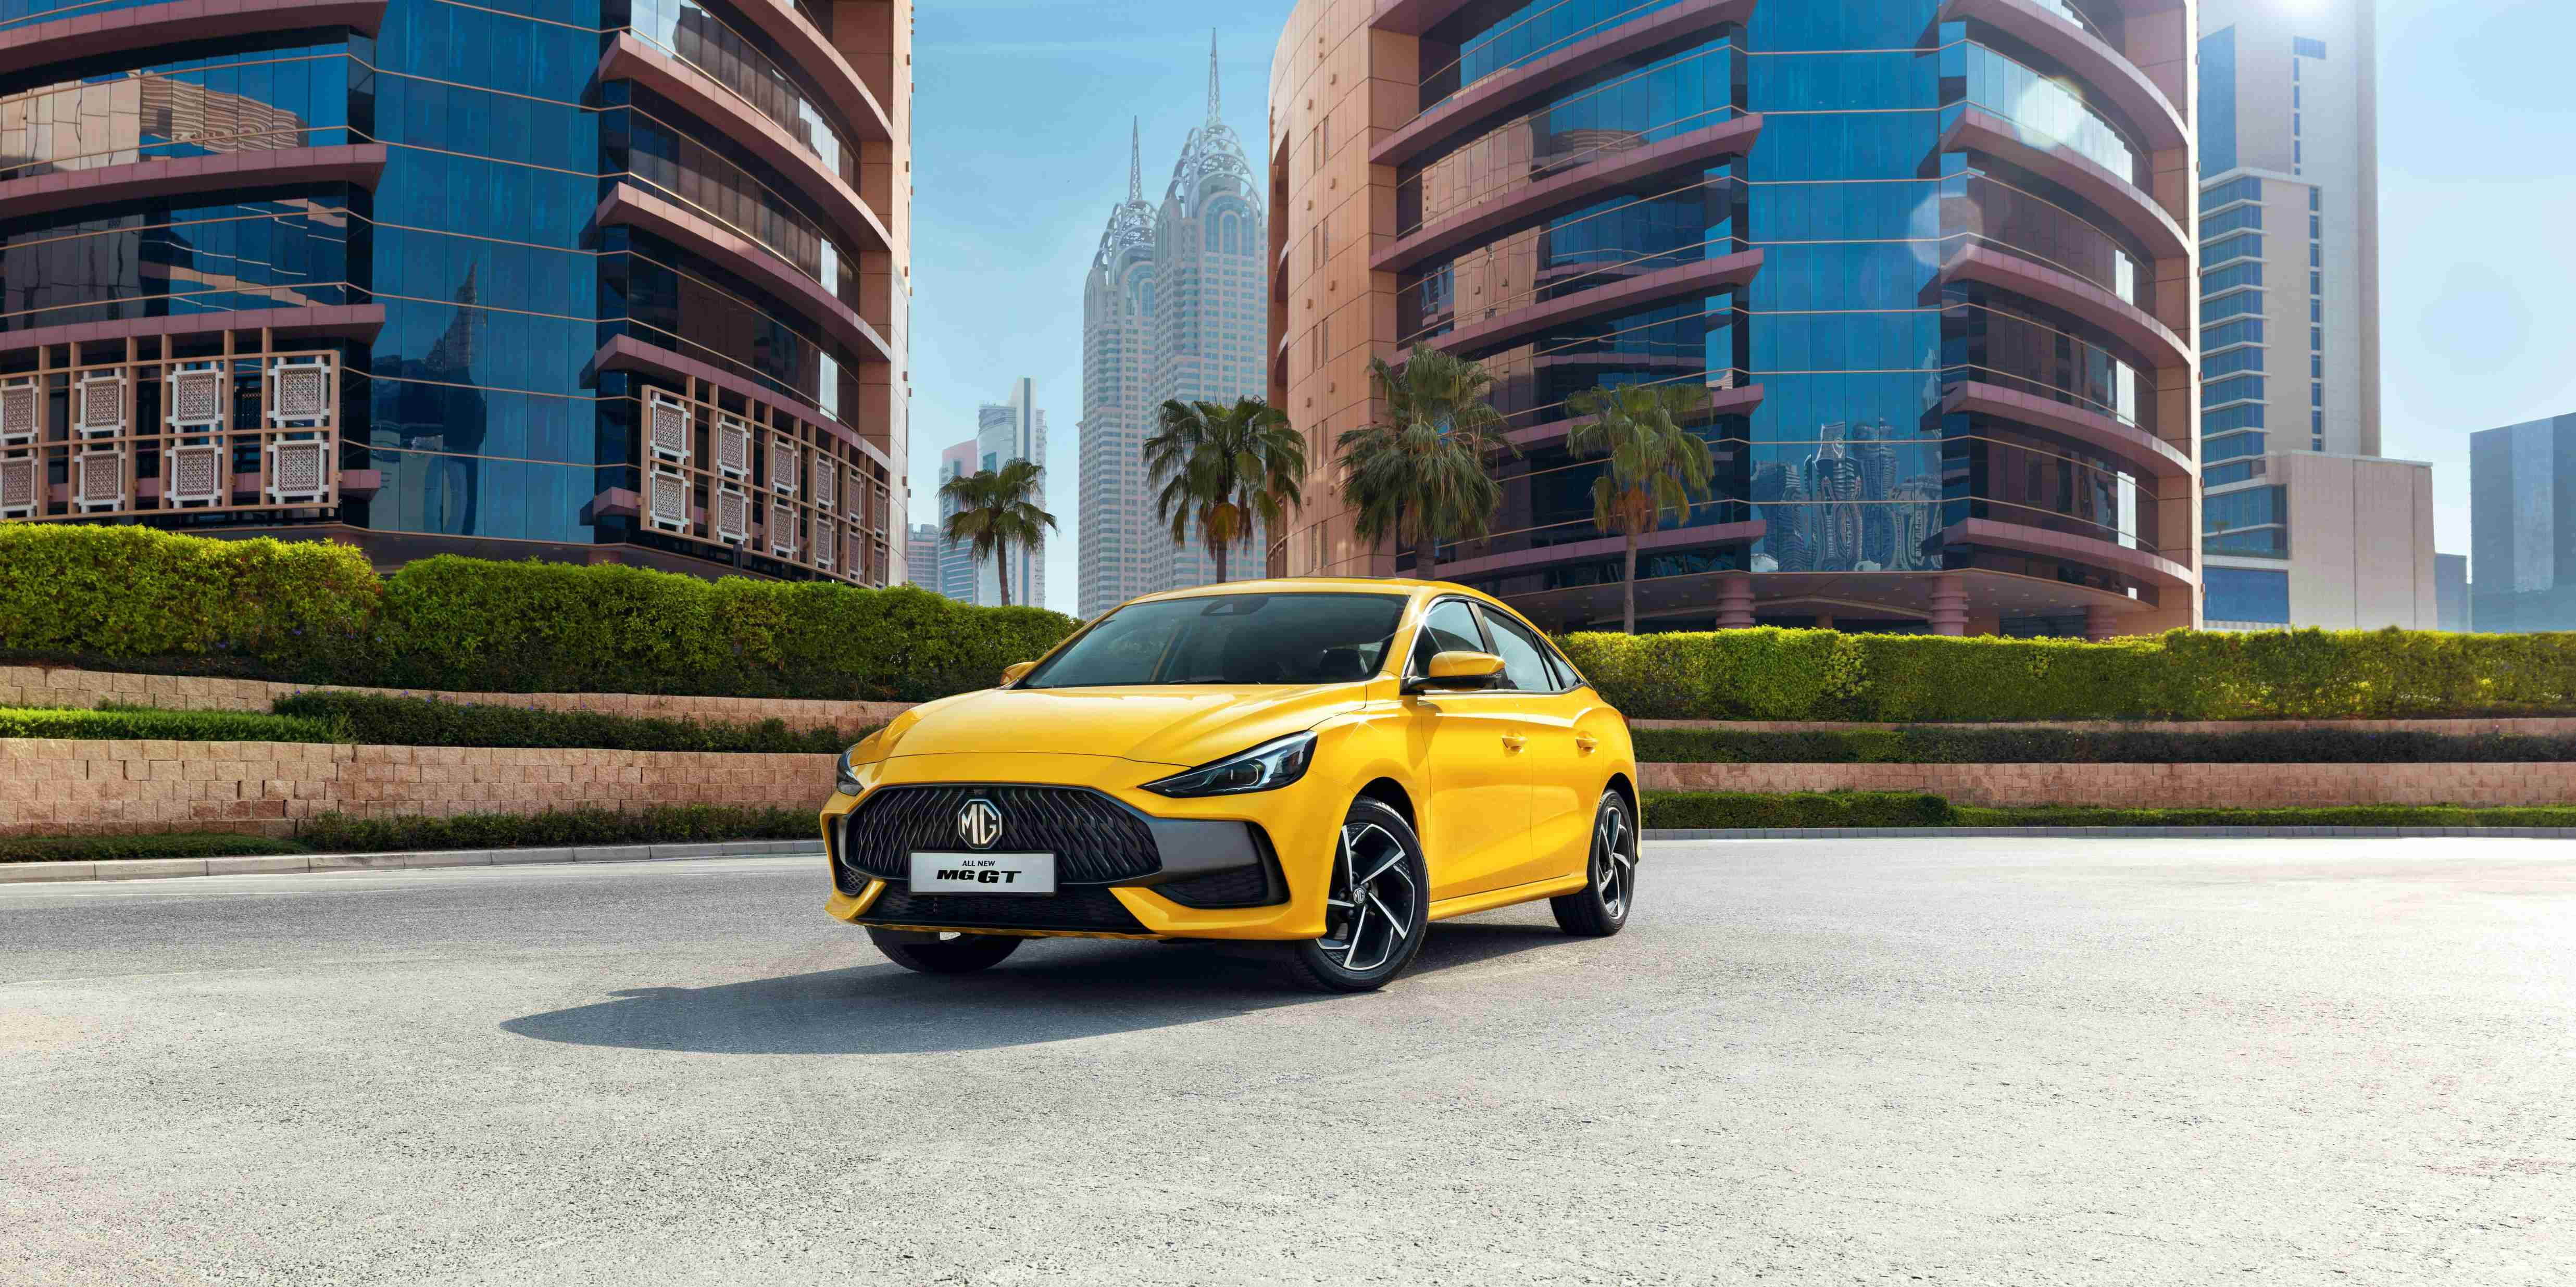 The All-New 2022 MG GT  A Rebellious Sports Sedan Launched in the Middle East